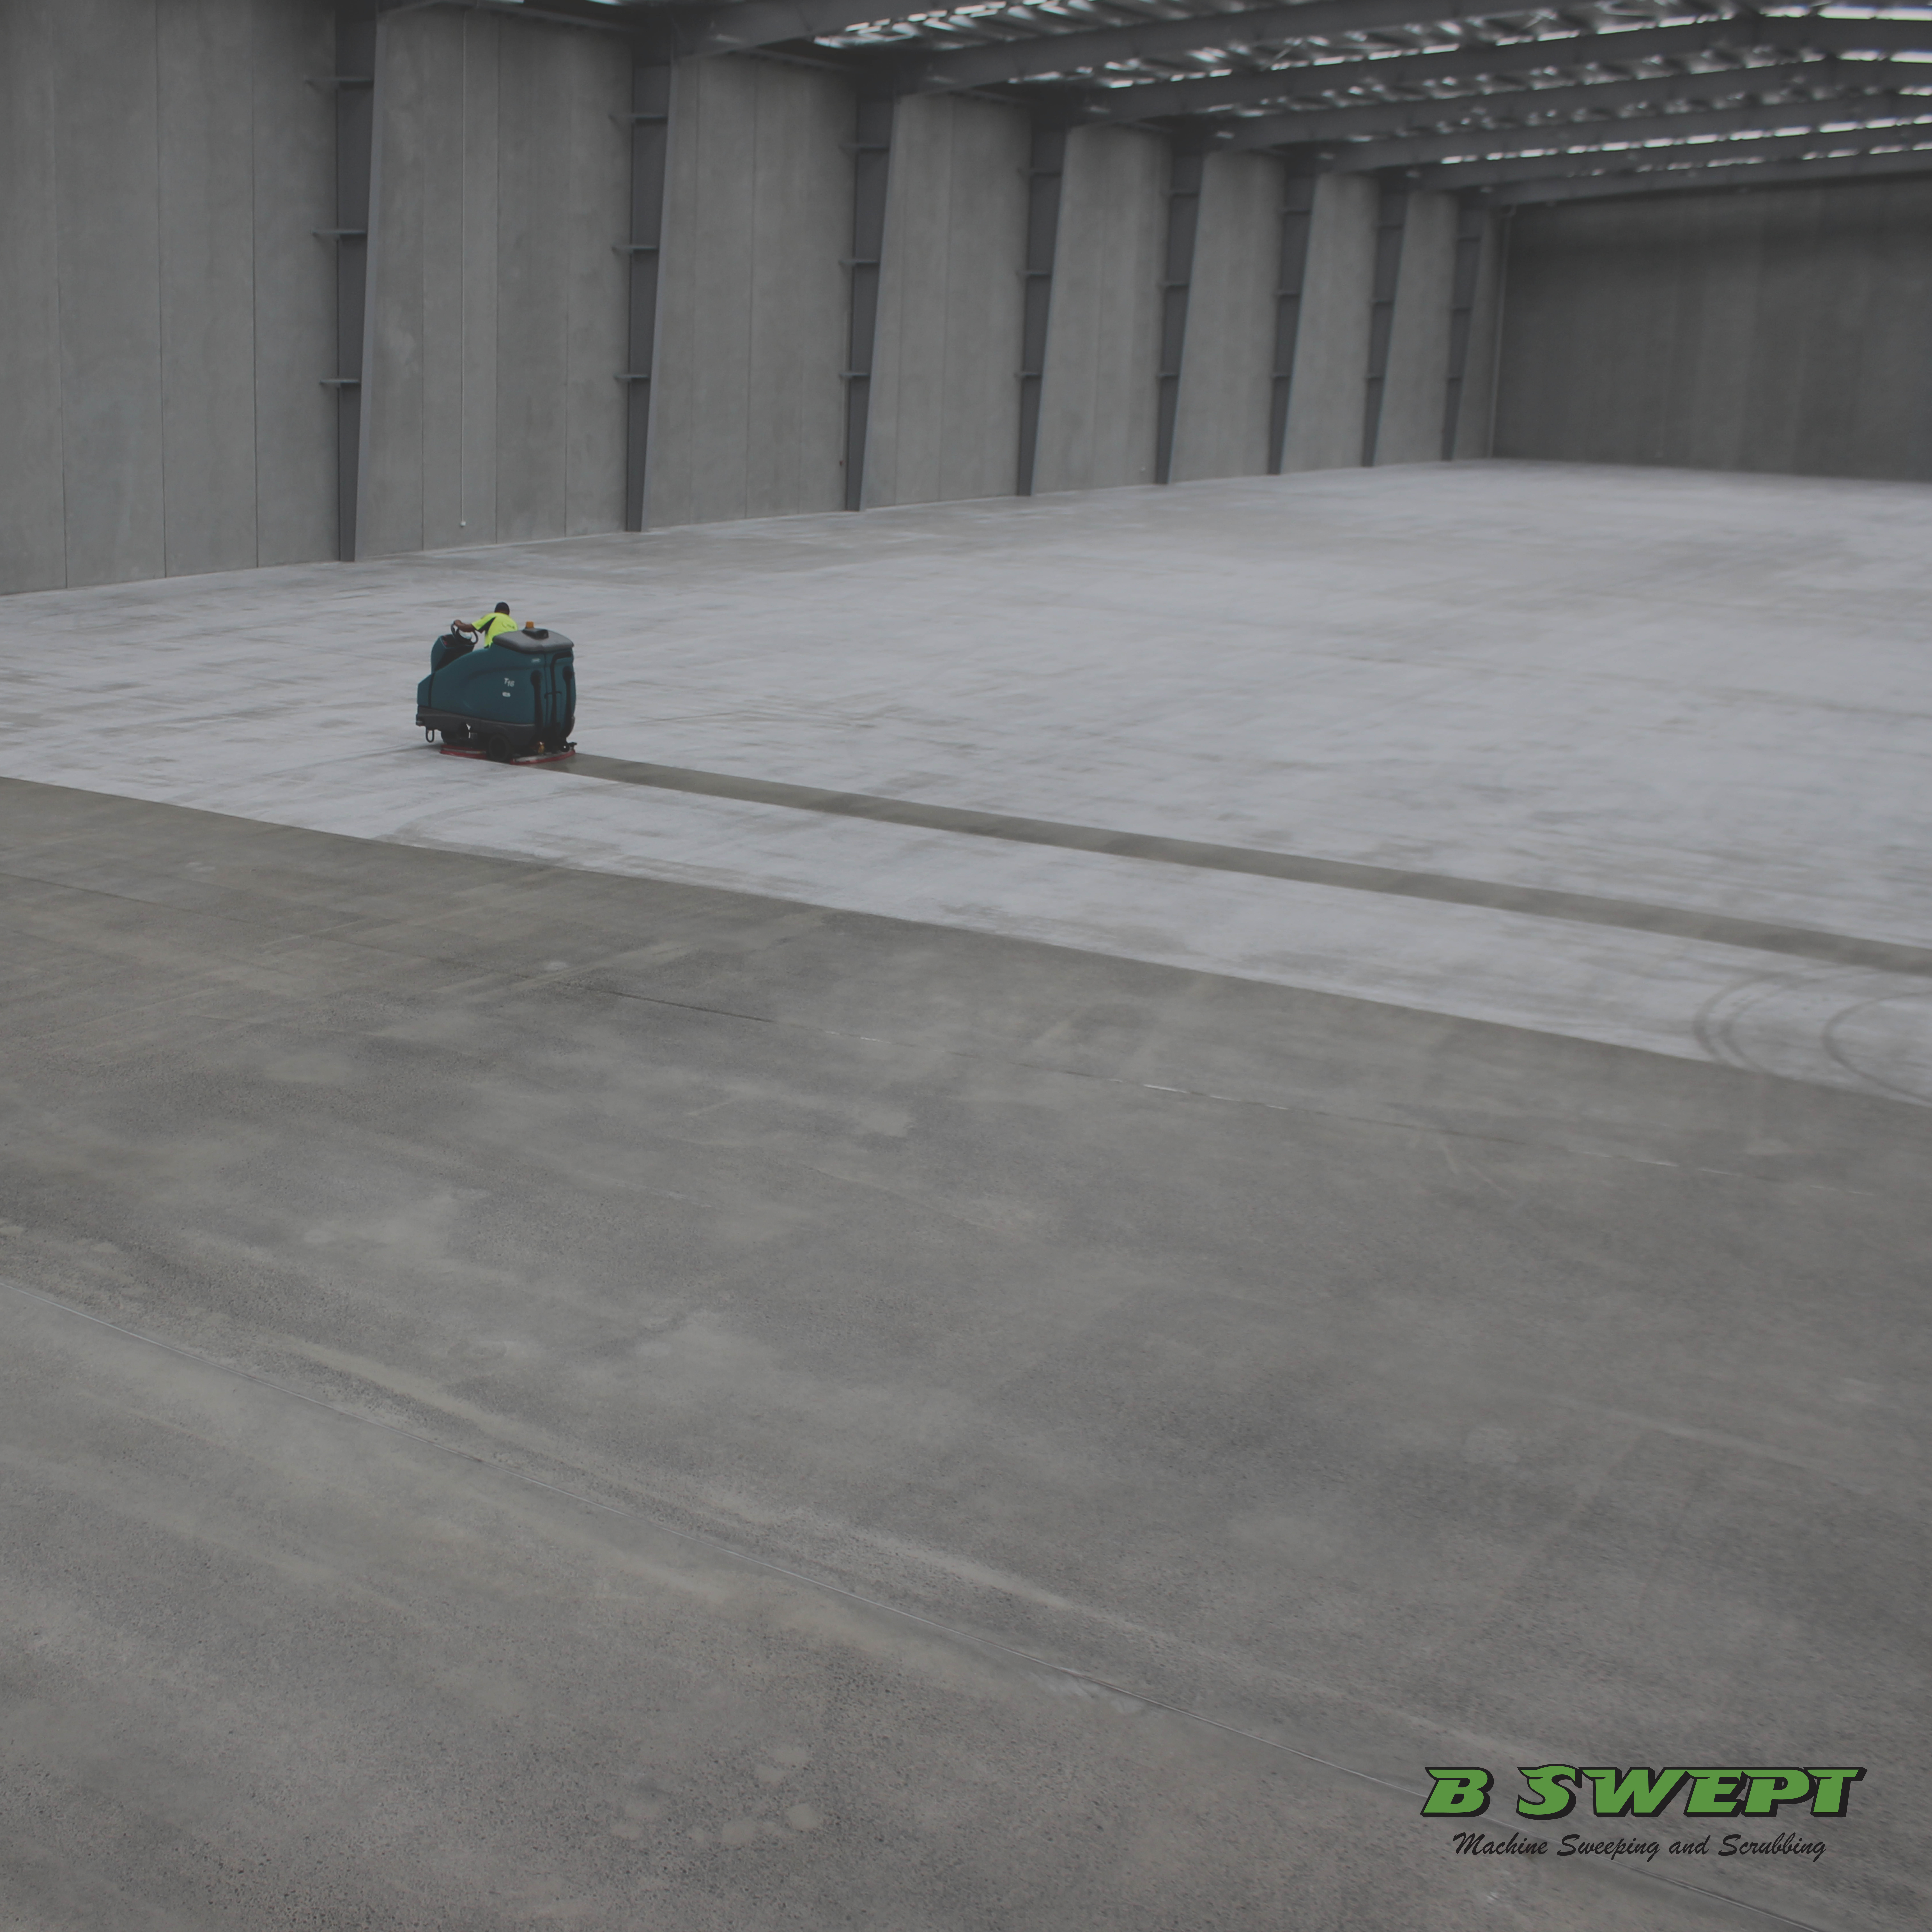 Bswept sweeper machine cleaning large space